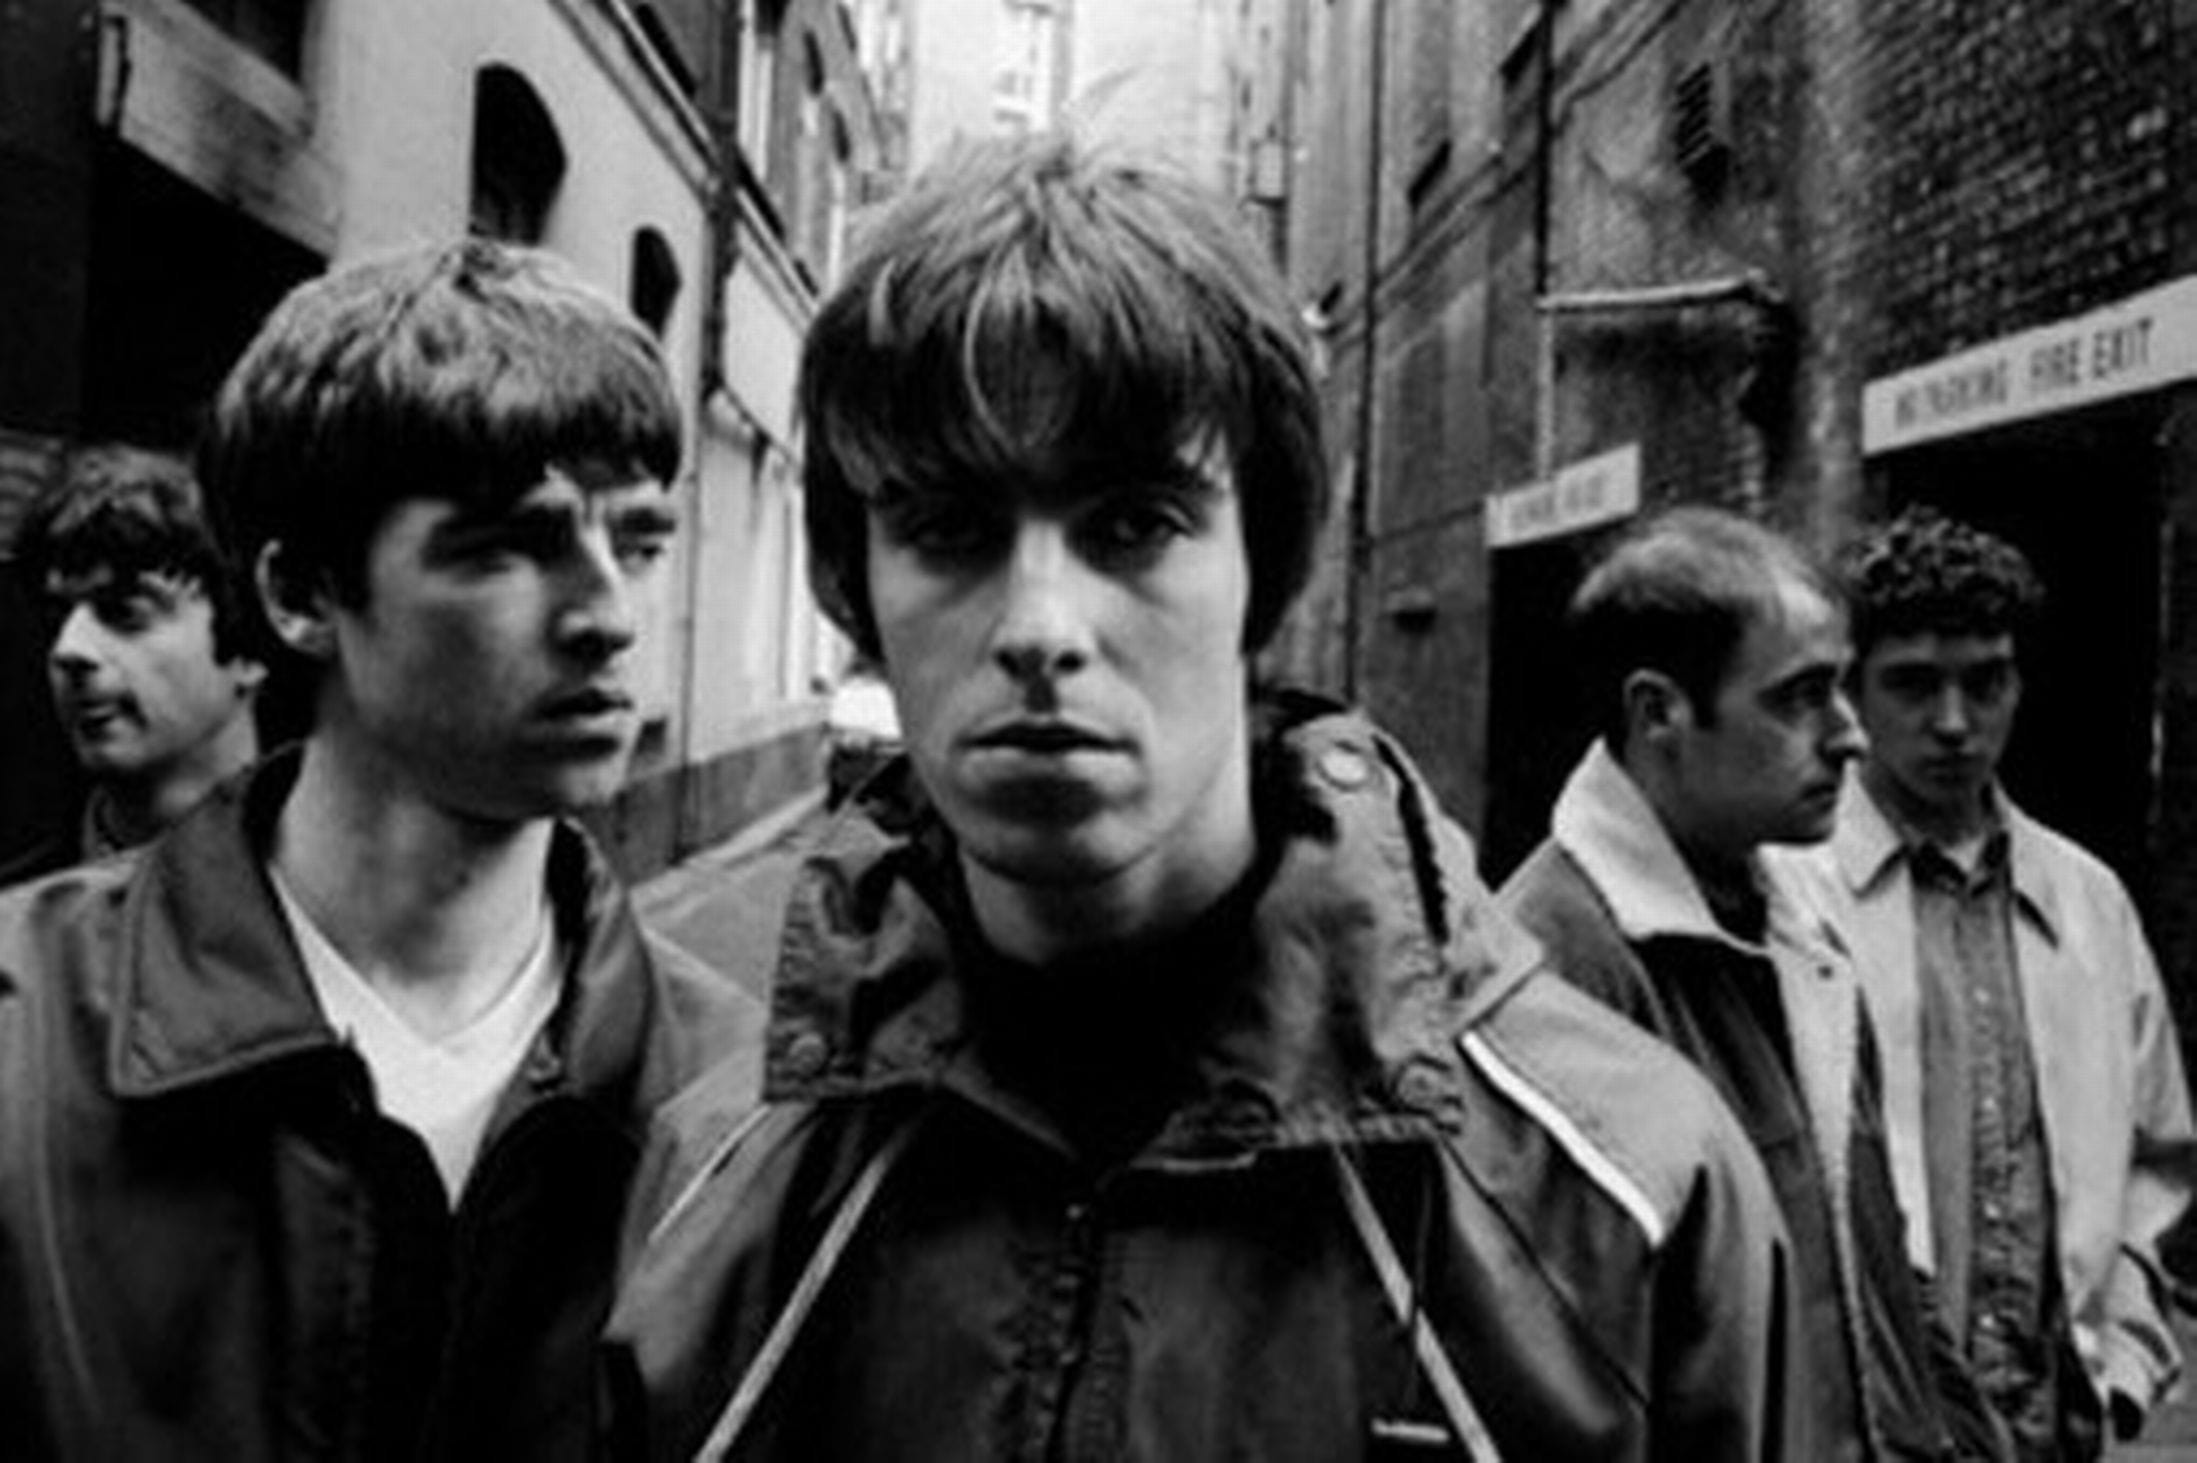 Oasis Wallpaper 66 pictures